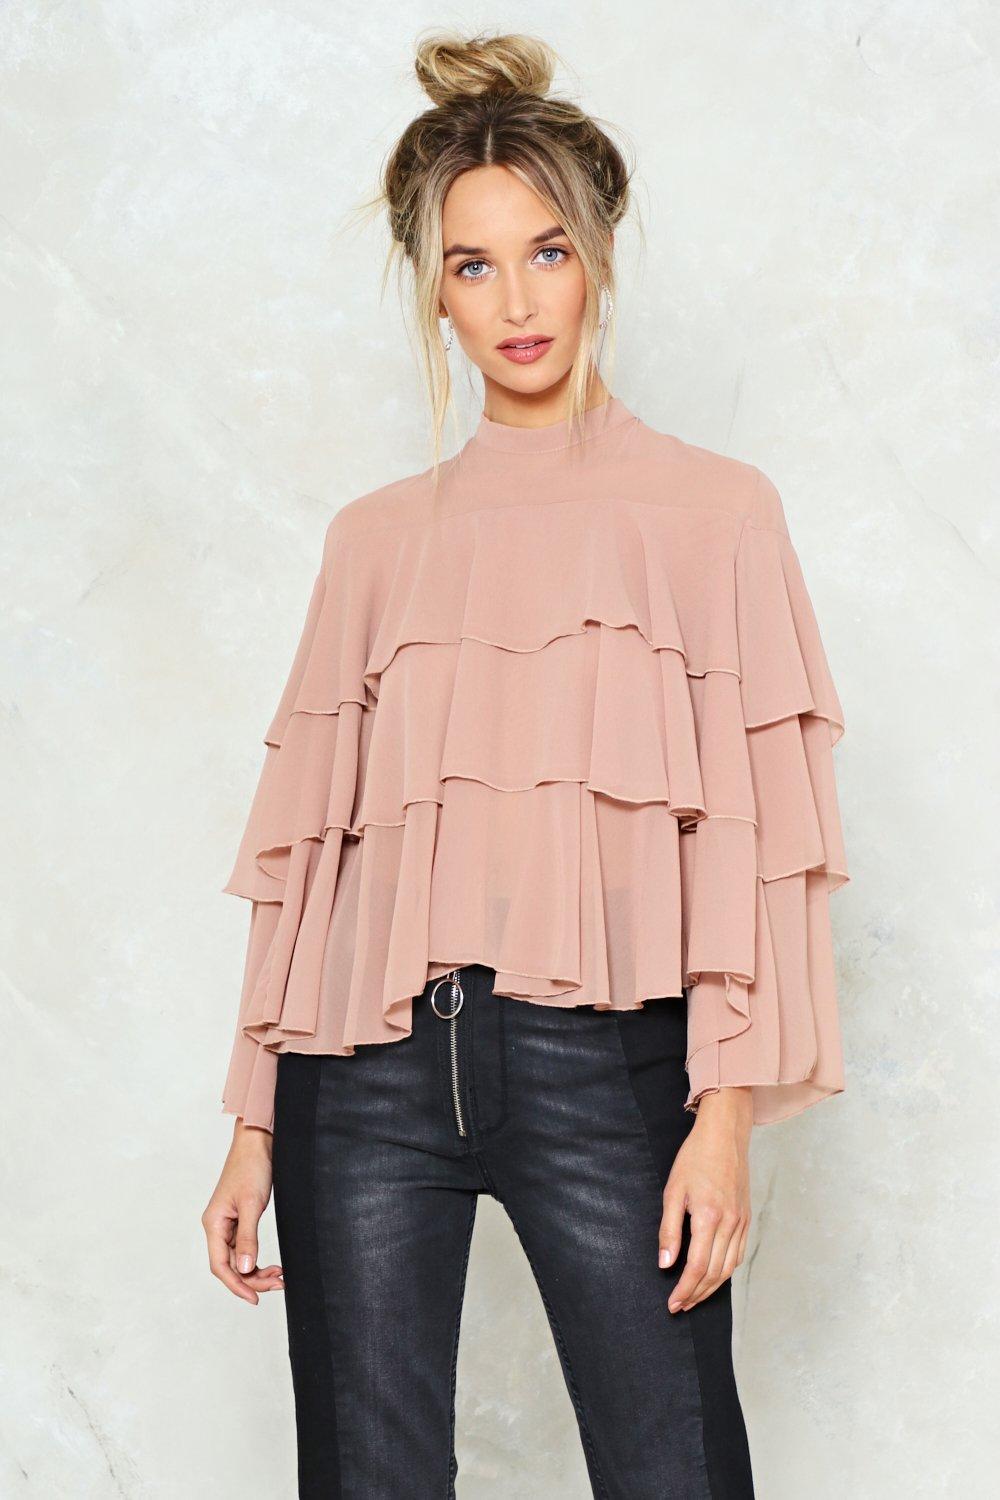 Dry My Tiers Ruffle Blouse